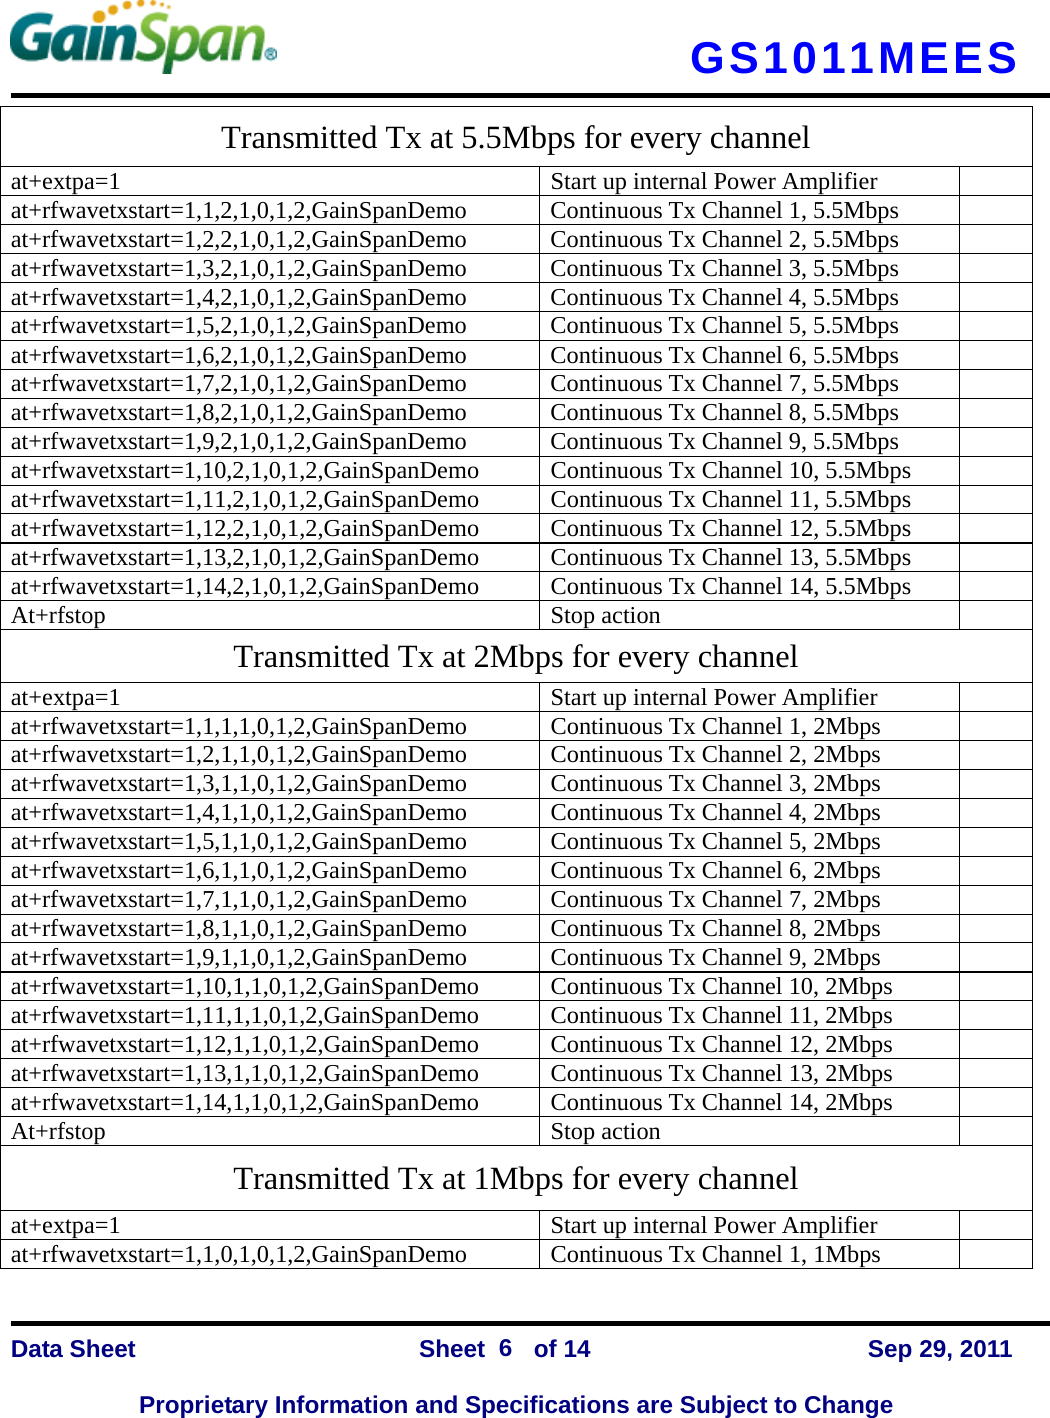   GS1011MEES    Data Sheet                Sheet    of 14      Sep 29, 2011  Proprietary Information and Specifications are Subject to Change 6 Transmitted Tx at 5.5Mbps for every channel at+extpa=1  Start up internal Power Amplifier   at+rfwavetxstart=1,1,2,1,0,1,2,GainSpanDemo  Continuous Tx Channel 1, 5.5Mbps   at+rfwavetxstart=1,2,2,1,0,1,2,GainSpanDemo  Continuous Tx Channel 2, 5.5Mbps   at+rfwavetxstart=1,3,2,1,0,1,2,GainSpanDemo  Continuous Tx Channel 3, 5.5Mbps   at+rfwavetxstart=1,4,2,1,0,1,2,GainSpanDemo  Continuous Tx Channel 4, 5.5Mbps   at+rfwavetxstart=1,5,2,1,0,1,2,GainSpanDemo  Continuous Tx Channel 5, 5.5Mbps   at+rfwavetxstart=1,6,2,1,0,1,2,GainSpanDemo  Continuous Tx Channel 6, 5.5Mbps   at+rfwavetxstart=1,7,2,1,0,1,2,GainSpanDemo  Continuous Tx Channel 7, 5.5Mbps   at+rfwavetxstart=1,8,2,1,0,1,2,GainSpanDemo  Continuous Tx Channel 8, 5.5Mbps   at+rfwavetxstart=1,9,2,1,0,1,2,GainSpanDemo  Continuous Tx Channel 9, 5.5Mbps   at+rfwavetxstart=1,10,2,1,0,1,2,GainSpanDemo  Continuous Tx Channel 10, 5.5Mbps   at+rfwavetxstart=1,11,2,1,0,1,2,GainSpanDemo  Continuous Tx Channel 11, 5.5Mbps   at+rfwavetxstart=1,12,2,1,0,1,2,GainSpanDemo  Continuous Tx Channel 12, 5.5Mbps   at+rfwavetxstart=1,13,2,1,0,1,2,GainSpanDemo  Continuous Tx Channel 13, 5.5Mbps   at+rfwavetxstart=1,14,2,1,0,1,2,GainSpanDemo  Continuous Tx Channel 14, 5.5Mbps   At+rfstop Stop action  Transmitted Tx at 2Mbps for every channel at+extpa=1  Start up internal Power Amplifier   at+rfwavetxstart=1,1,1,1,0,1,2,GainSpanDemo  Continuous Tx Channel 1, 2Mbps   at+rfwavetxstart=1,2,1,1,0,1,2,GainSpanDemo  Continuous Tx Channel 2, 2Mbps   at+rfwavetxstart=1,3,1,1,0,1,2,GainSpanDemo  Continuous Tx Channel 3, 2Mbps   at+rfwavetxstart=1,4,1,1,0,1,2,GainSpanDemo  Continuous Tx Channel 4, 2Mbps   at+rfwavetxstart=1,5,1,1,0,1,2,GainSpanDemo  Continuous Tx Channel 5, 2Mbps   at+rfwavetxstart=1,6,1,1,0,1,2,GainSpanDemo  Continuous Tx Channel 6, 2Mbps   at+rfwavetxstart=1,7,1,1,0,1,2,GainSpanDemo  Continuous Tx Channel 7, 2Mbps   at+rfwavetxstart=1,8,1,1,0,1,2,GainSpanDemo  Continuous Tx Channel 8, 2Mbps   at+rfwavetxstart=1,9,1,1,0,1,2,GainSpanDemo  Continuous Tx Channel 9, 2Mbps   at+rfwavetxstart=1,10,1,1,0,1,2,GainSpanDemo  Continuous Tx Channel 10, 2Mbps   at+rfwavetxstart=1,11,1,1,0,1,2,GainSpanDemo  Continuous Tx Channel 11, 2Mbps   at+rfwavetxstart=1,12,1,1,0,1,2,GainSpanDemo  Continuous Tx Channel 12, 2Mbps   at+rfwavetxstart=1,13,1,1,0,1,2,GainSpanDemo  Continuous Tx Channel 13, 2Mbps   at+rfwavetxstart=1,14,1,1,0,1,2,GainSpanDemo  Continuous Tx Channel 14, 2Mbps   At+rfstop Stop action  Transmitted Tx at 1Mbps for every channel at+extpa=1  Start up internal Power Amplifier   at+rfwavetxstart=1,1,0,1,0,1,2,GainSpanDemo  Continuous Tx Channel 1, 1Mbps   